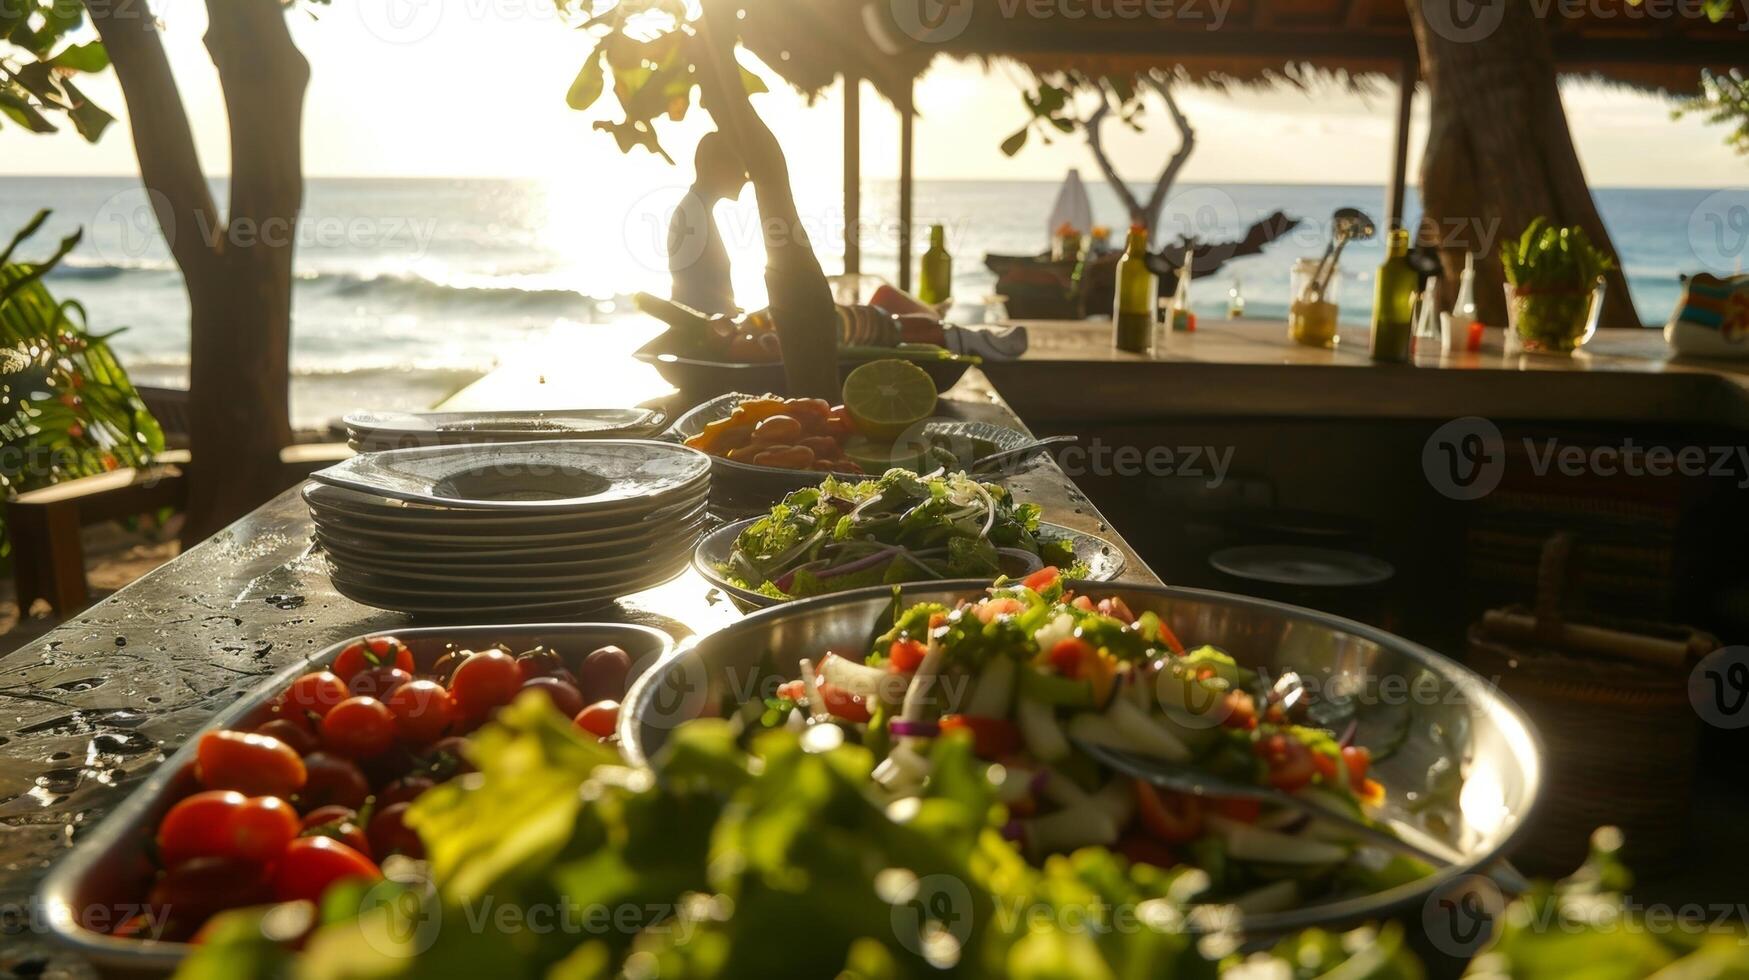 The tropical sun shines down on the beachside counter as the salad is being prepared photo